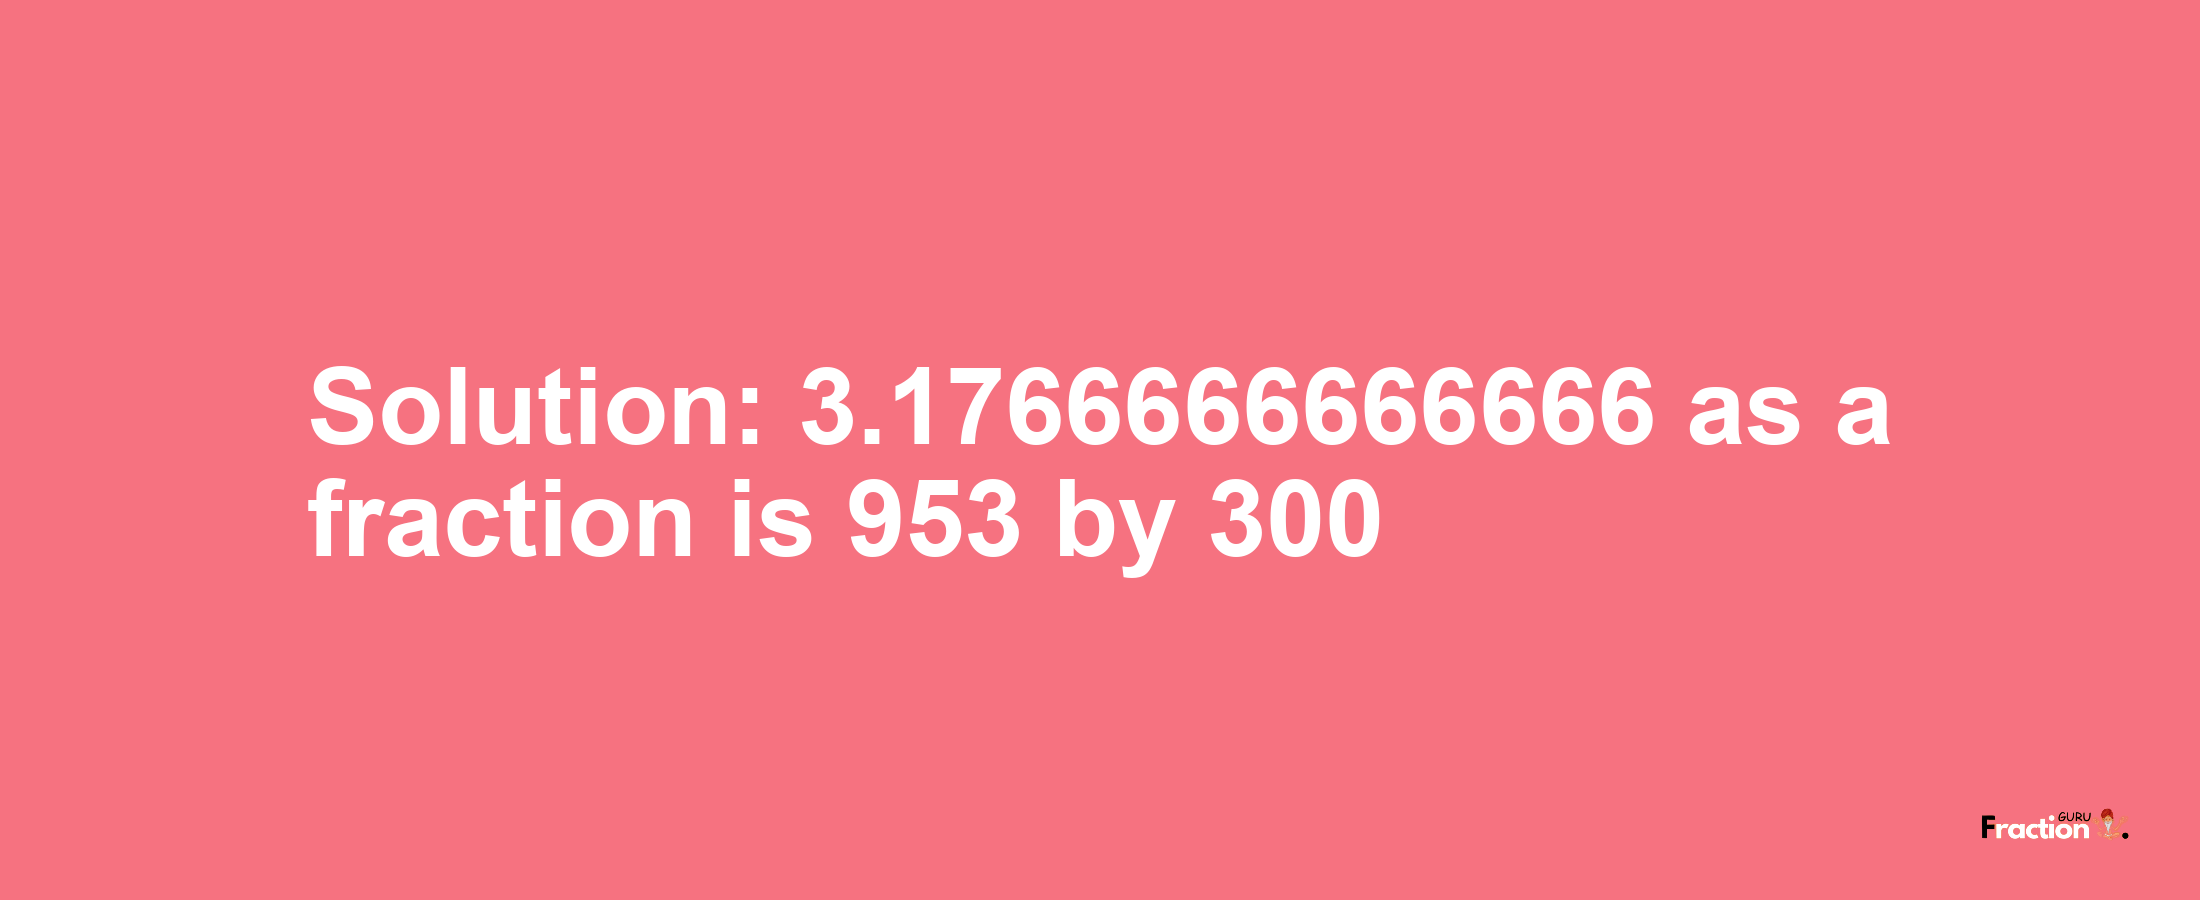 Solution:3.1766666666666 as a fraction is 953/300